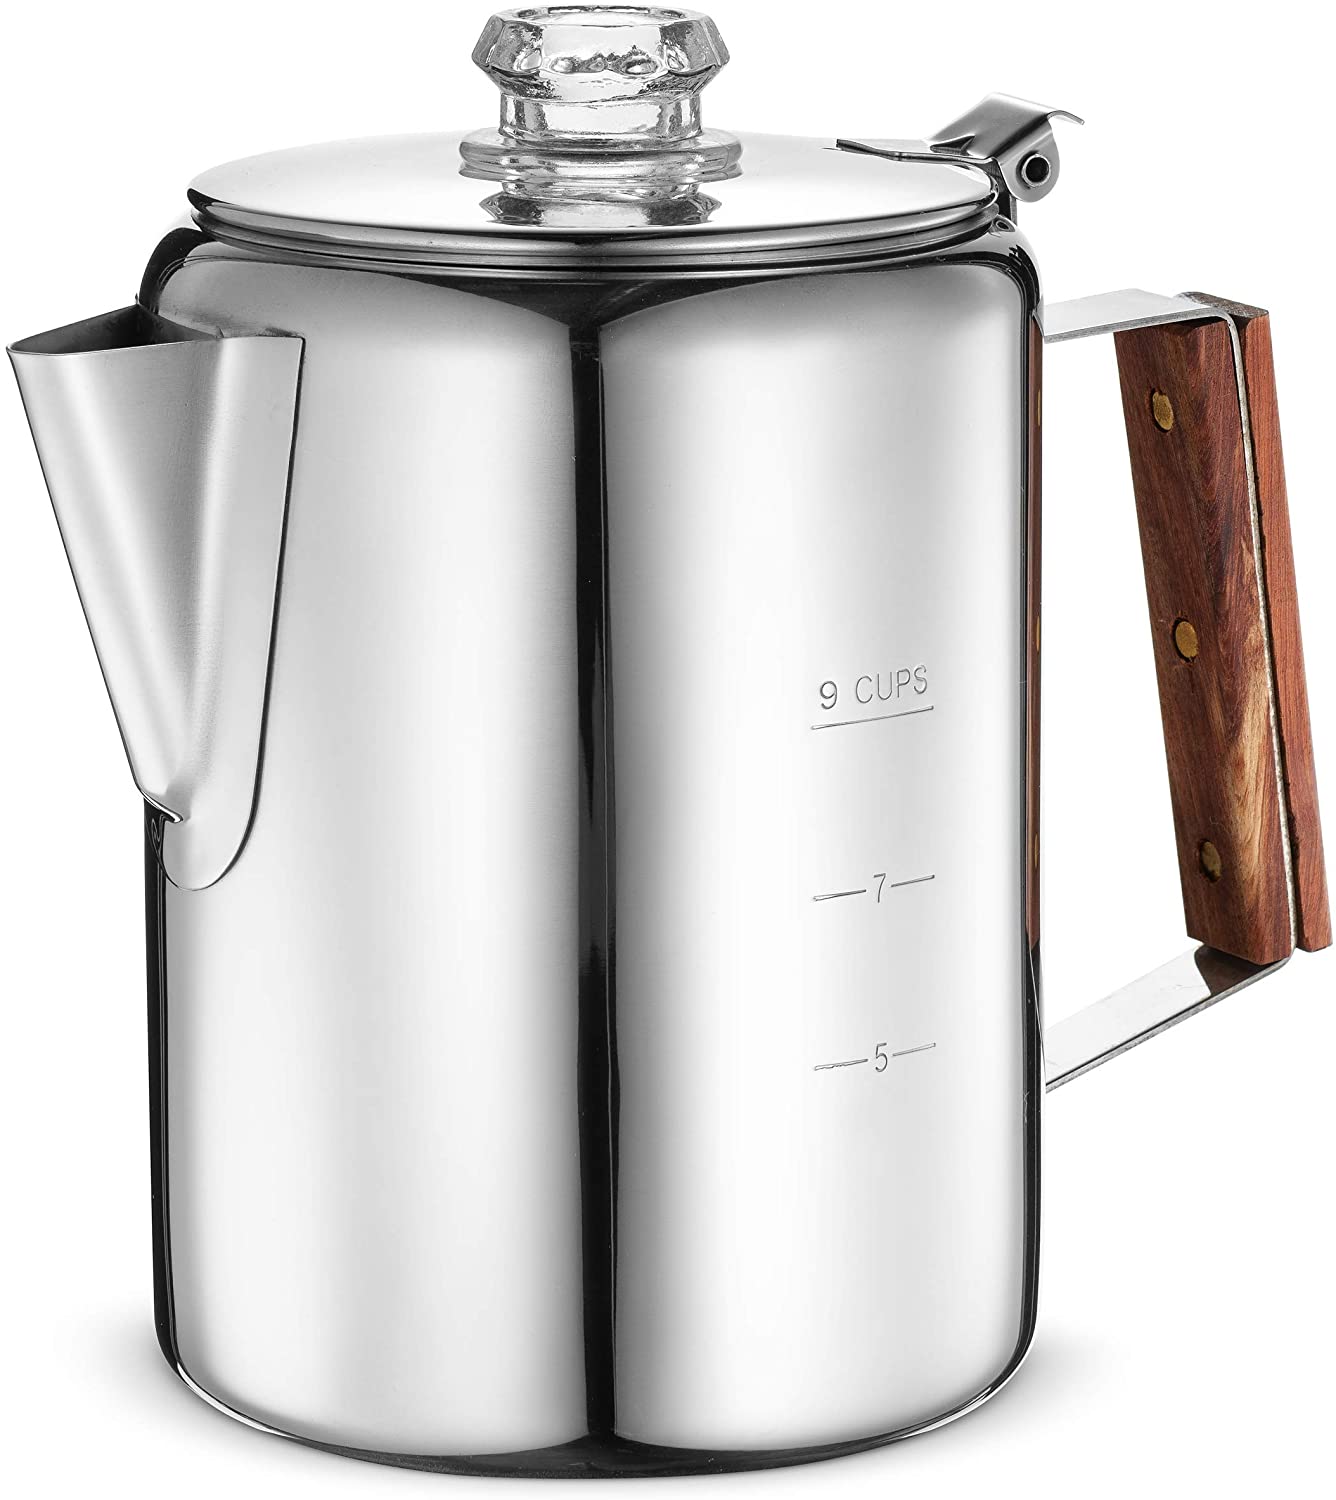 https://www.dontwasteyourmoney.com/wp-content/uploads/2020/06/eurolux-durable-stainless-steel-coffee-percolator-9-cup-coffee-percolator.jpg